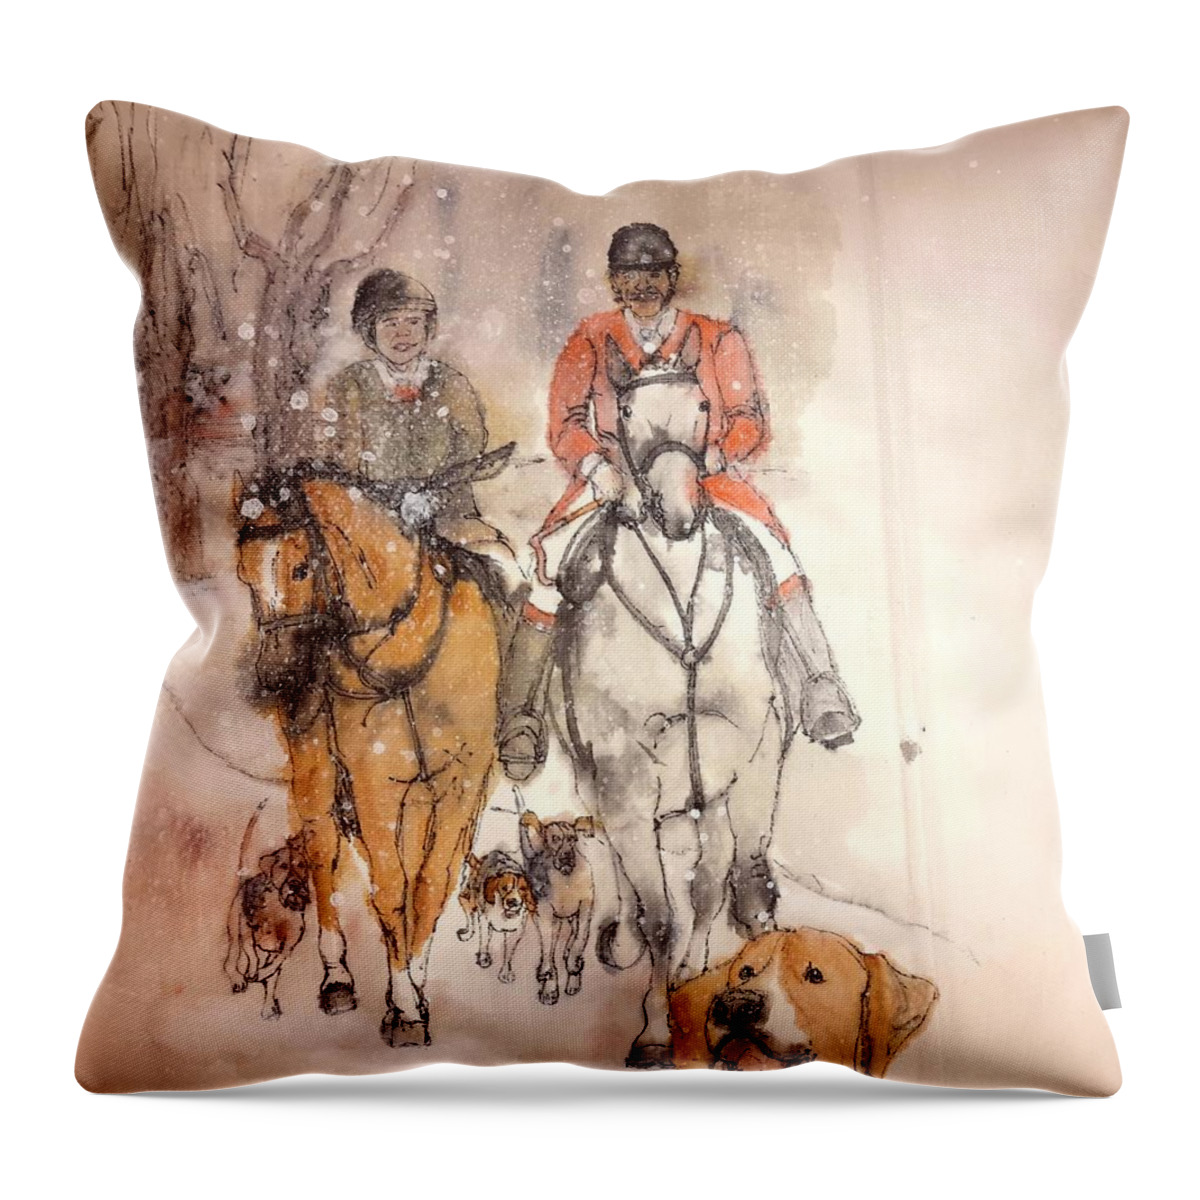 Horses. Riding. Hounds. Foxhunting. Throw Pillow featuring the painting Talley ho album #17 by Debbi Saccomanno Chan